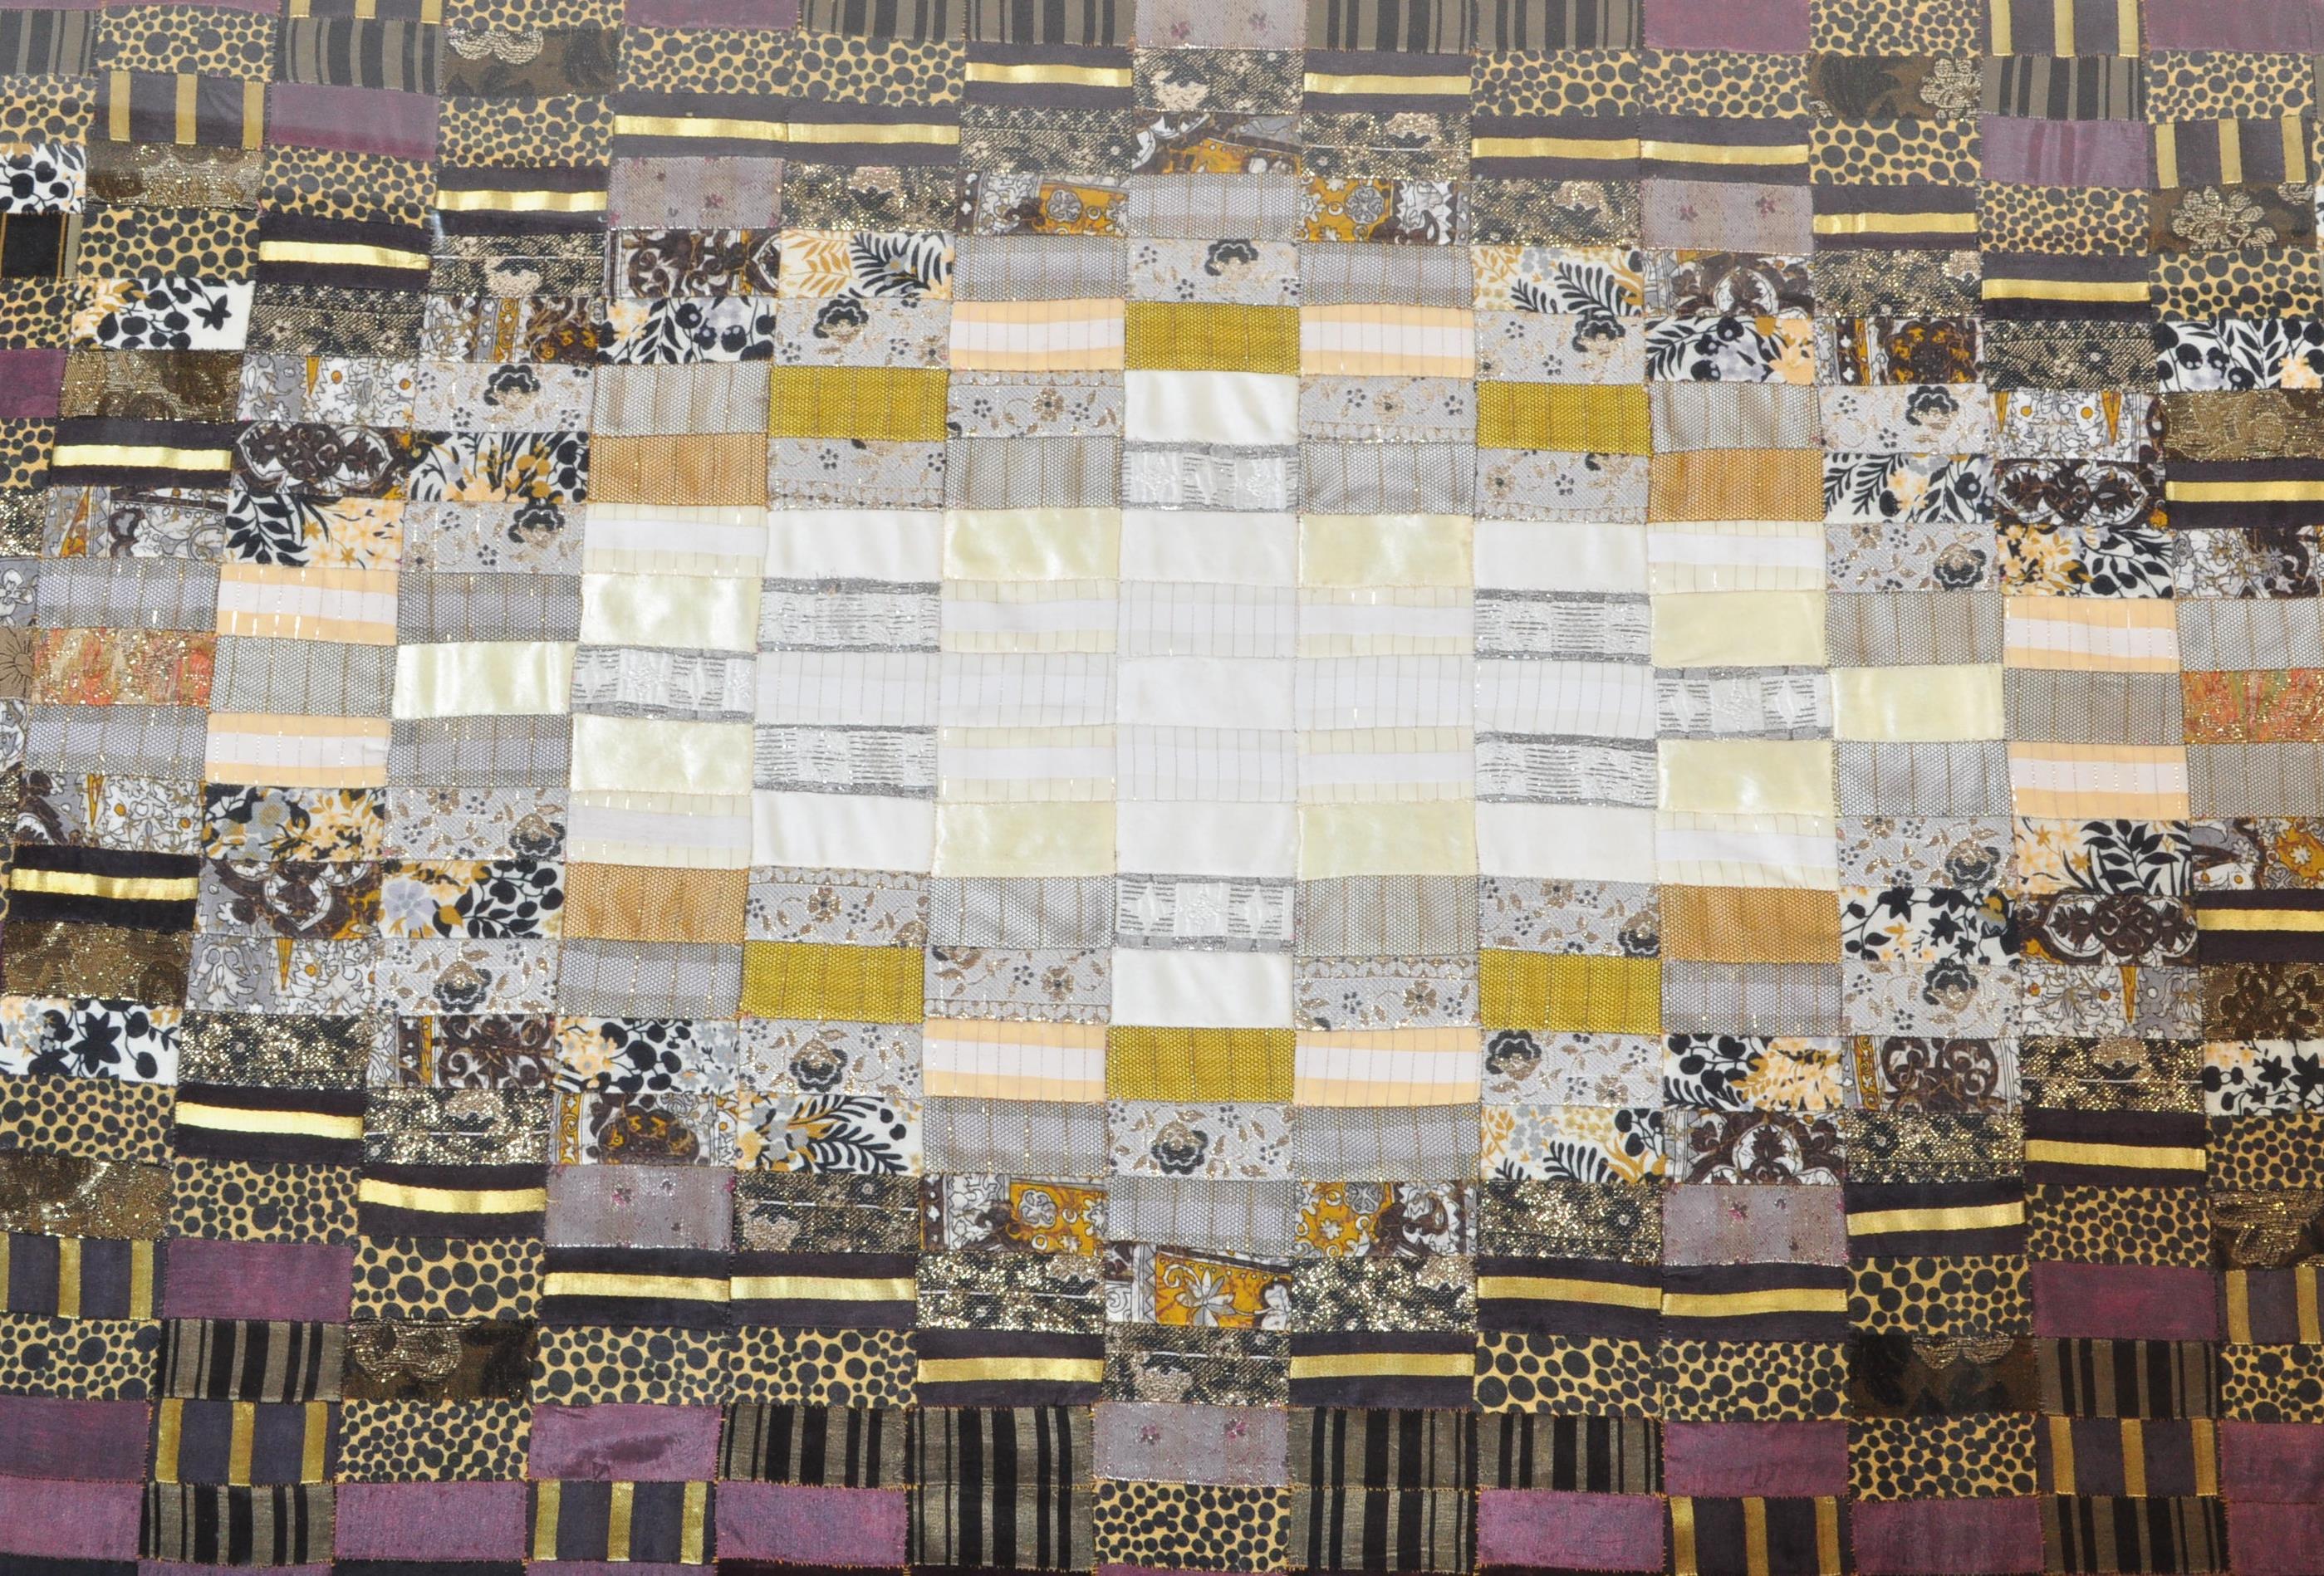 FB CAINS SWA - HAND SEWN FABRIC PATCHWORK QUILT - Image 2 of 4